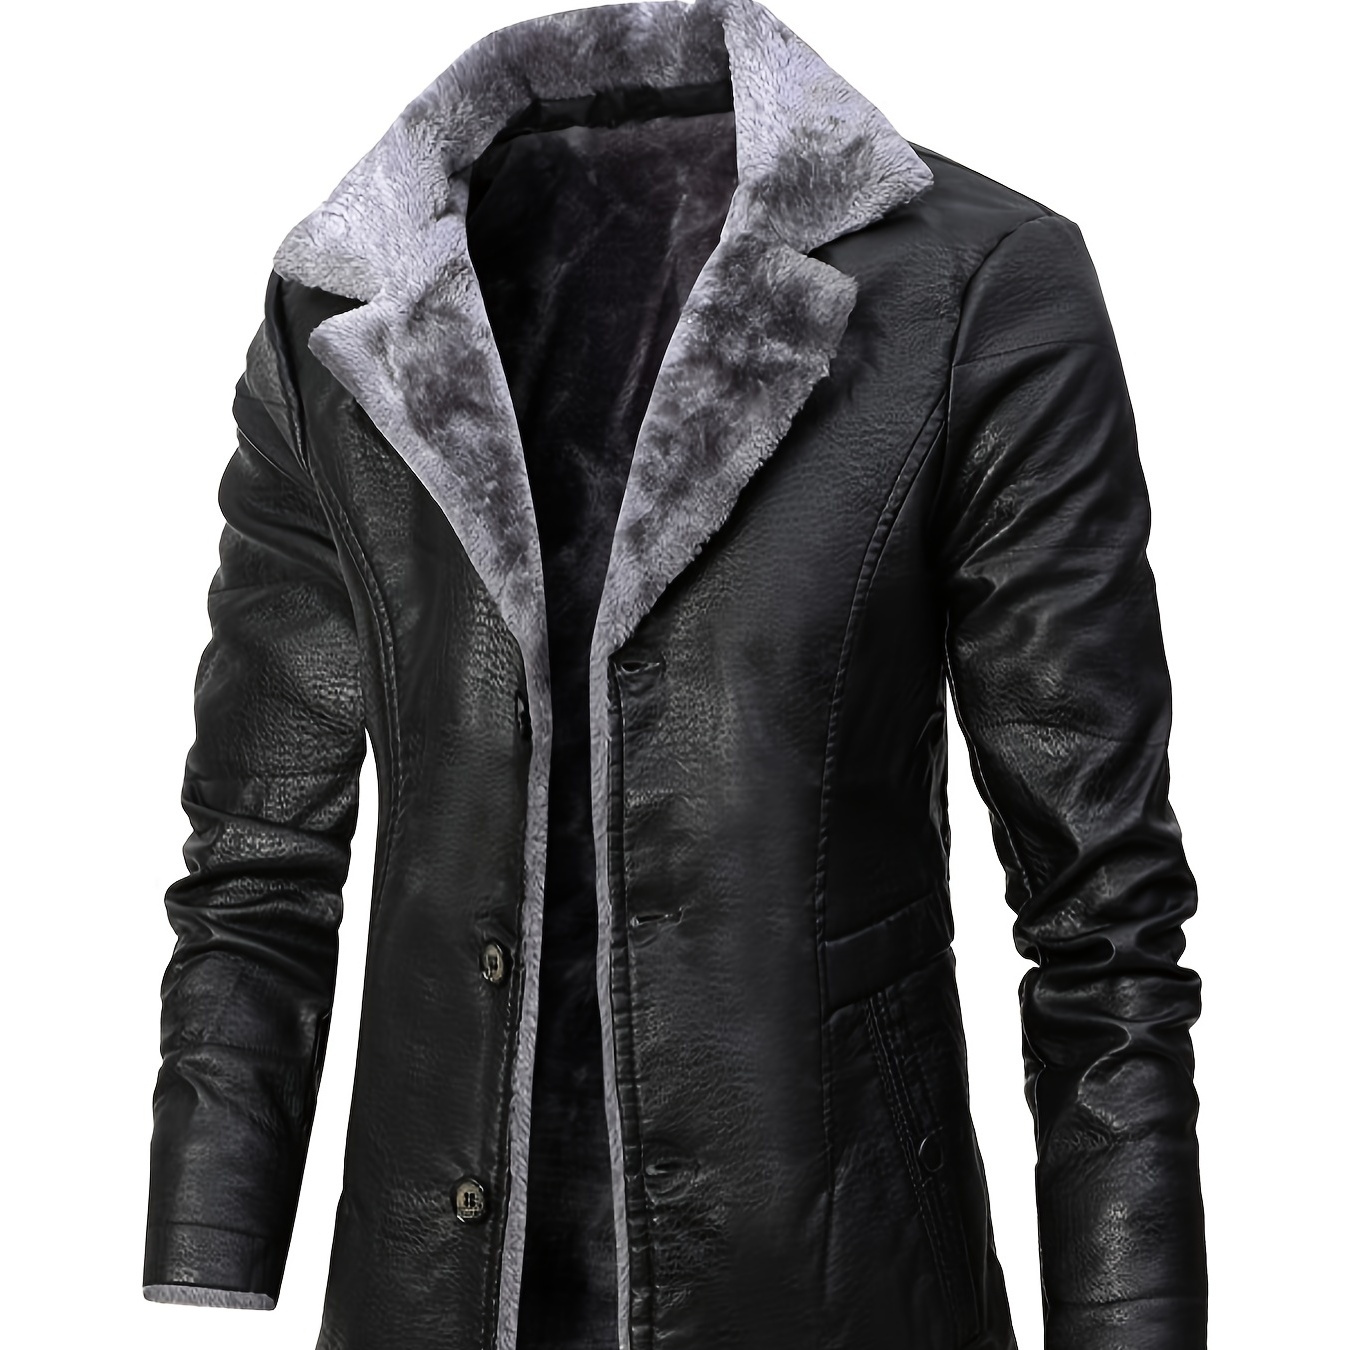 Artificial Pu Leather Men's Clothes For Autumn And Winter Jacket ...